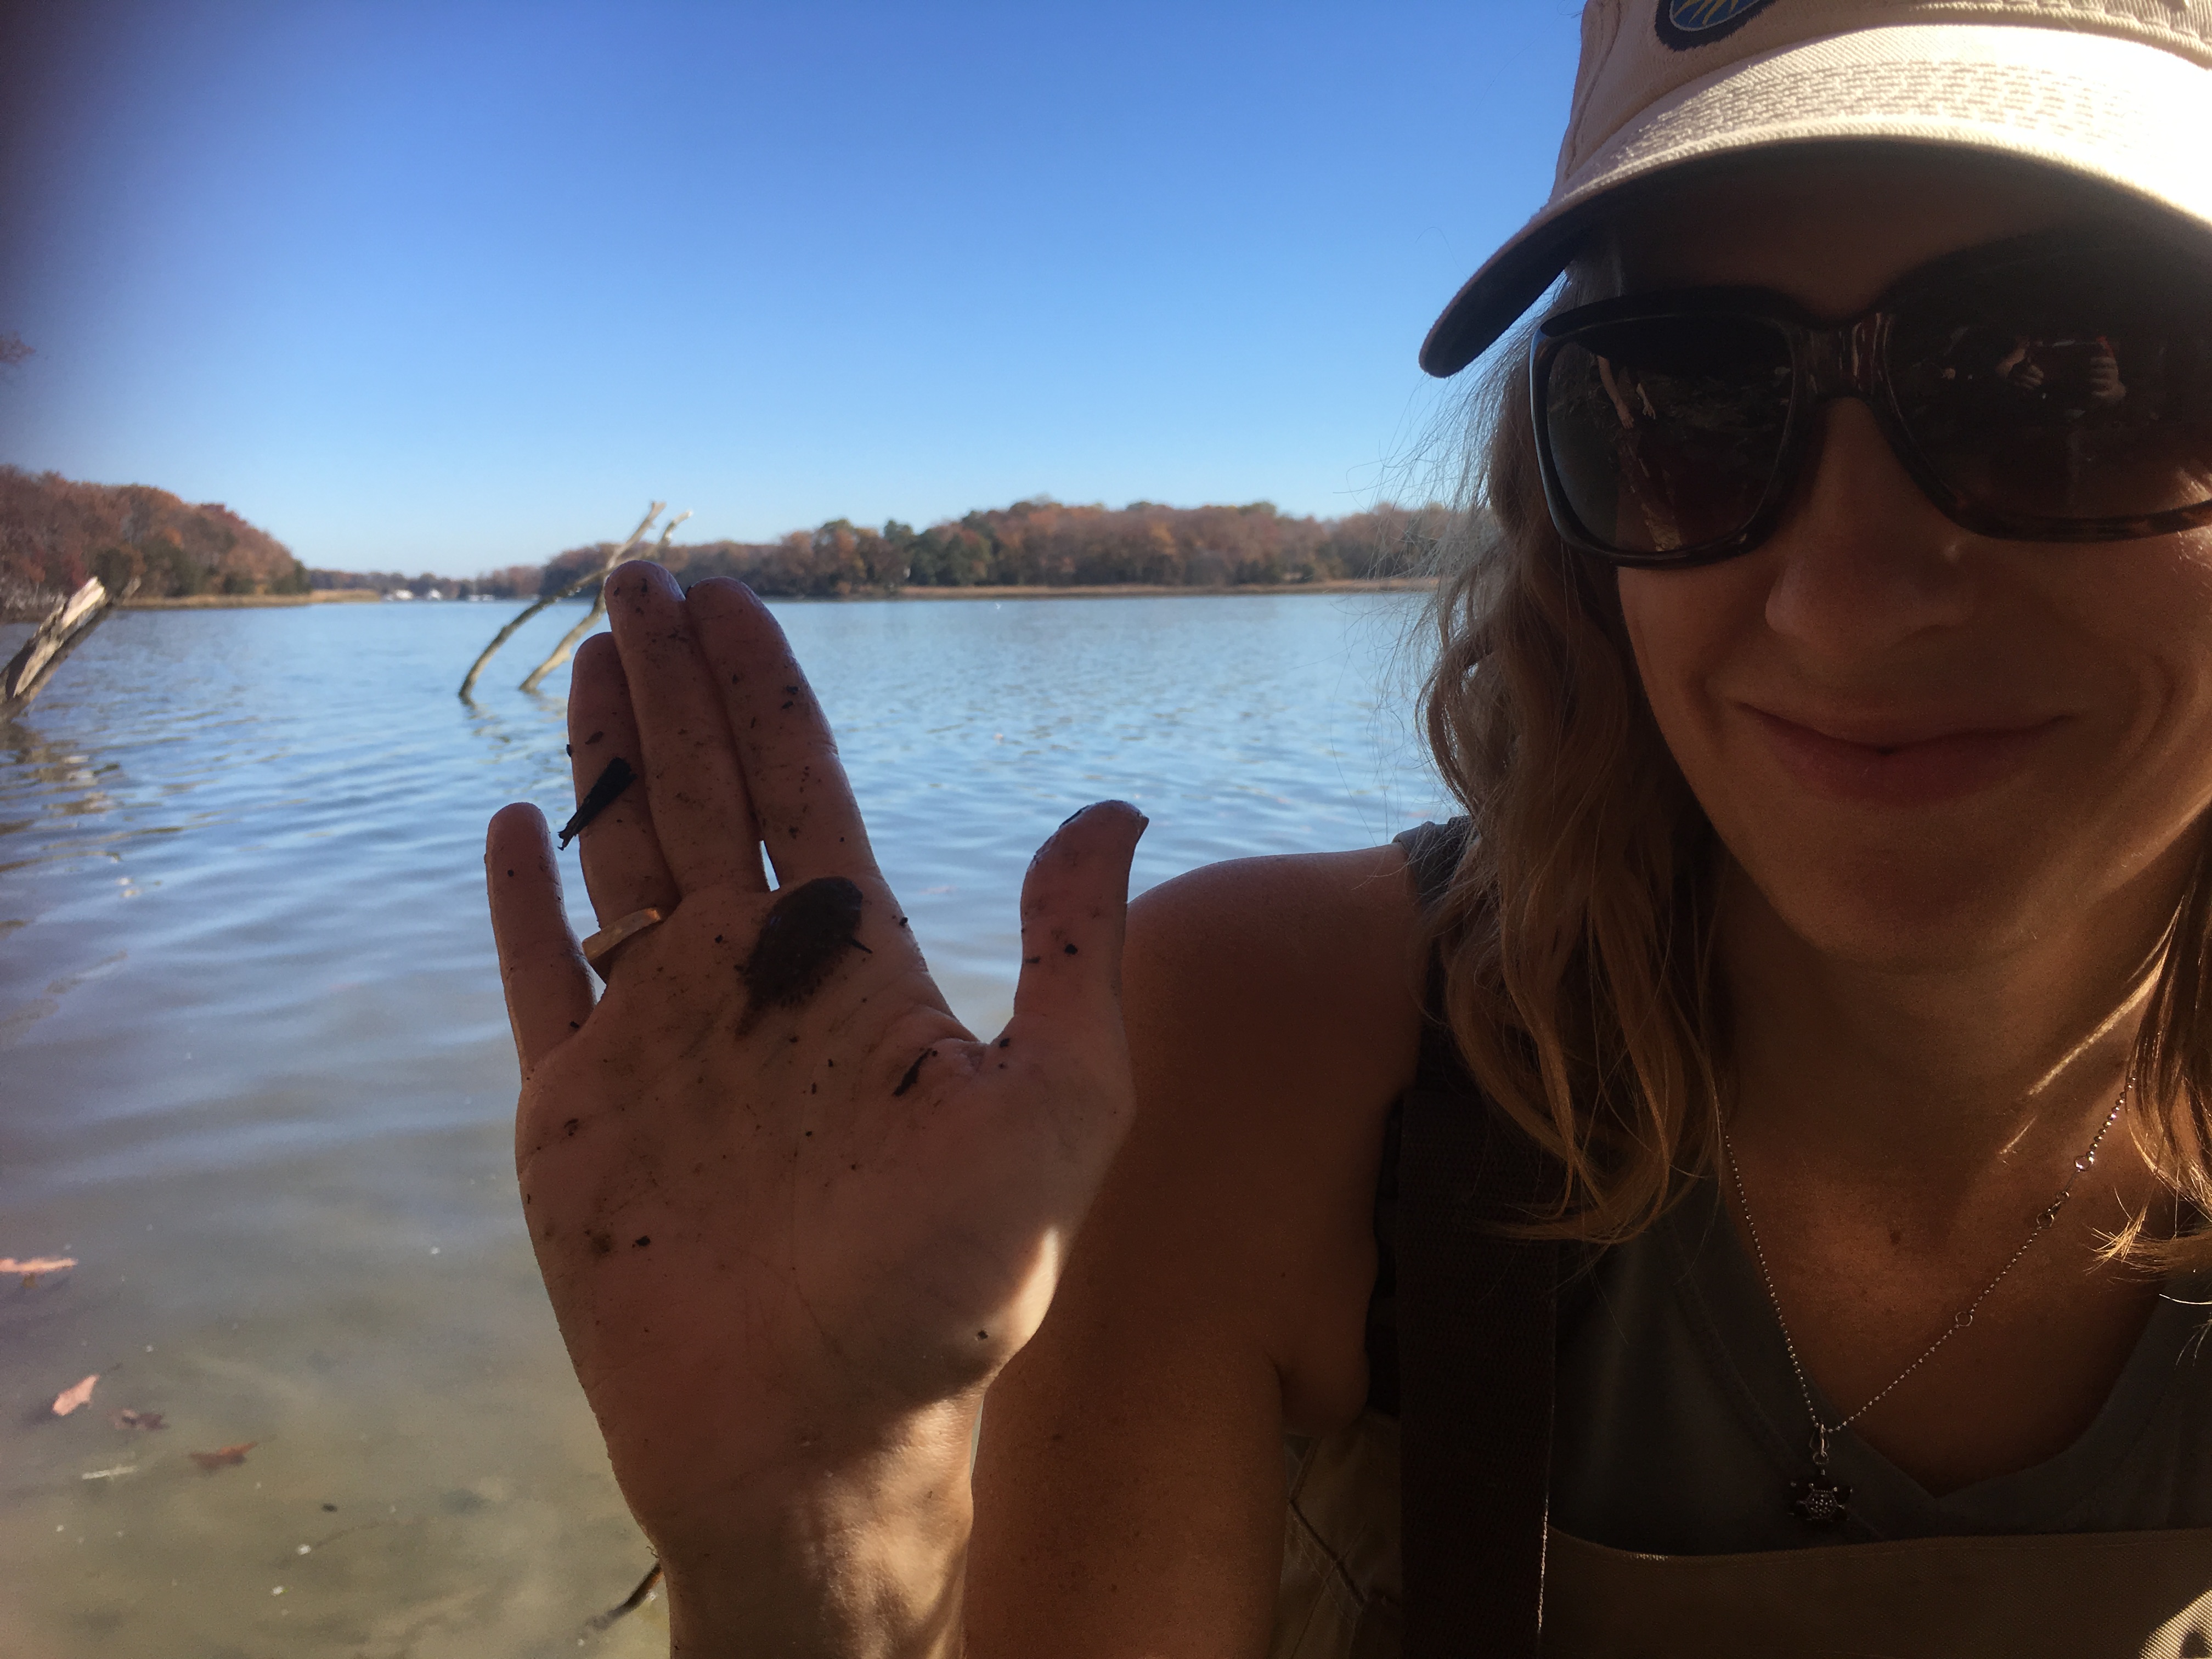 Stacey holds a small fish